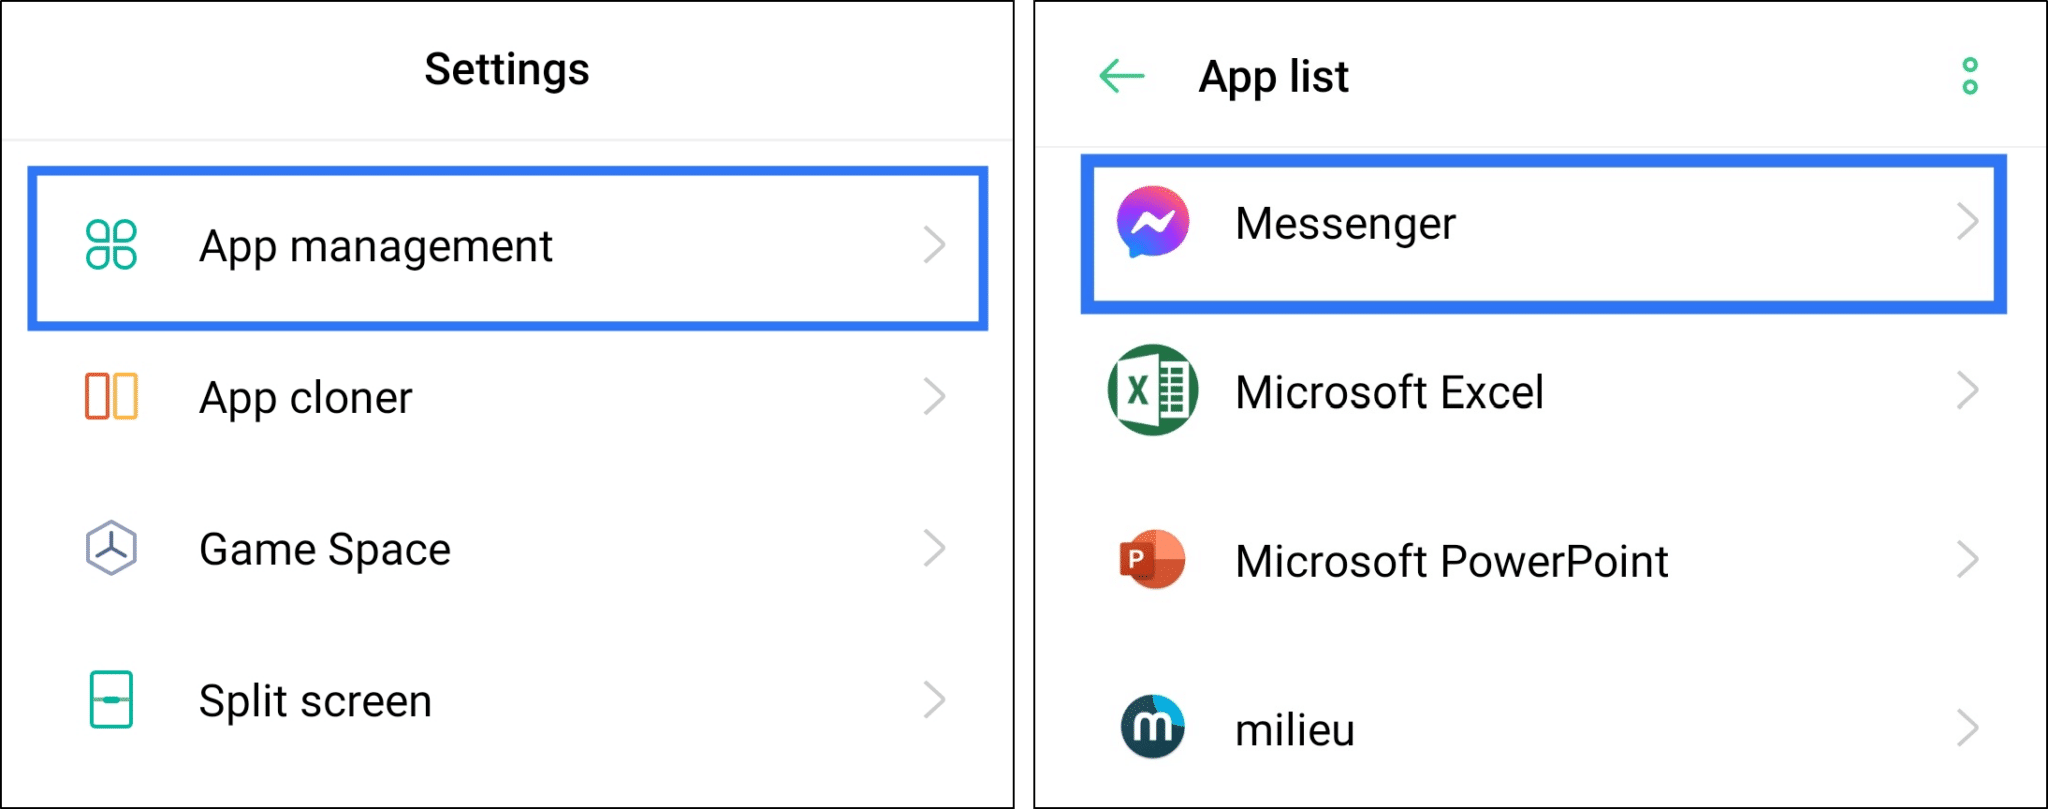 access Facebook Messenger app settings in system settings on Android to enable notifications and fix Facebook Messenger not sending, working, receiving, showing or loading messages